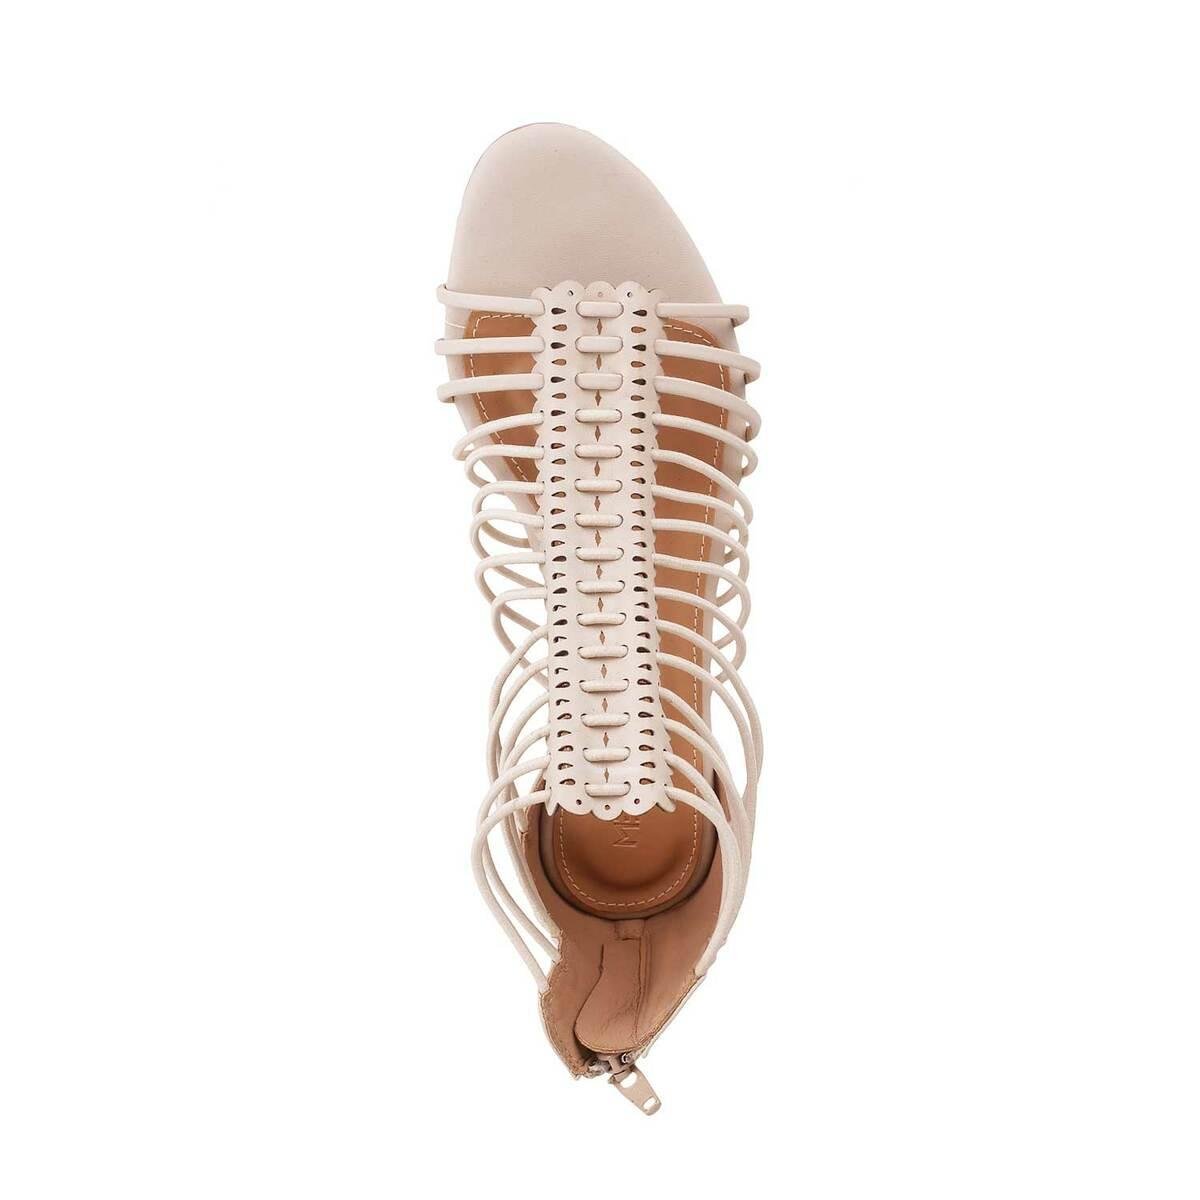 Vintage Gladiator Gladiator Sandals For Women With Hollow Out Design, Lace  Up Low Heel, Wedges, And Open Toe For Women Perfect For Summer Weddings And  Zapatos Mujer From Loveuuu, $18.64 | DHgate.Com